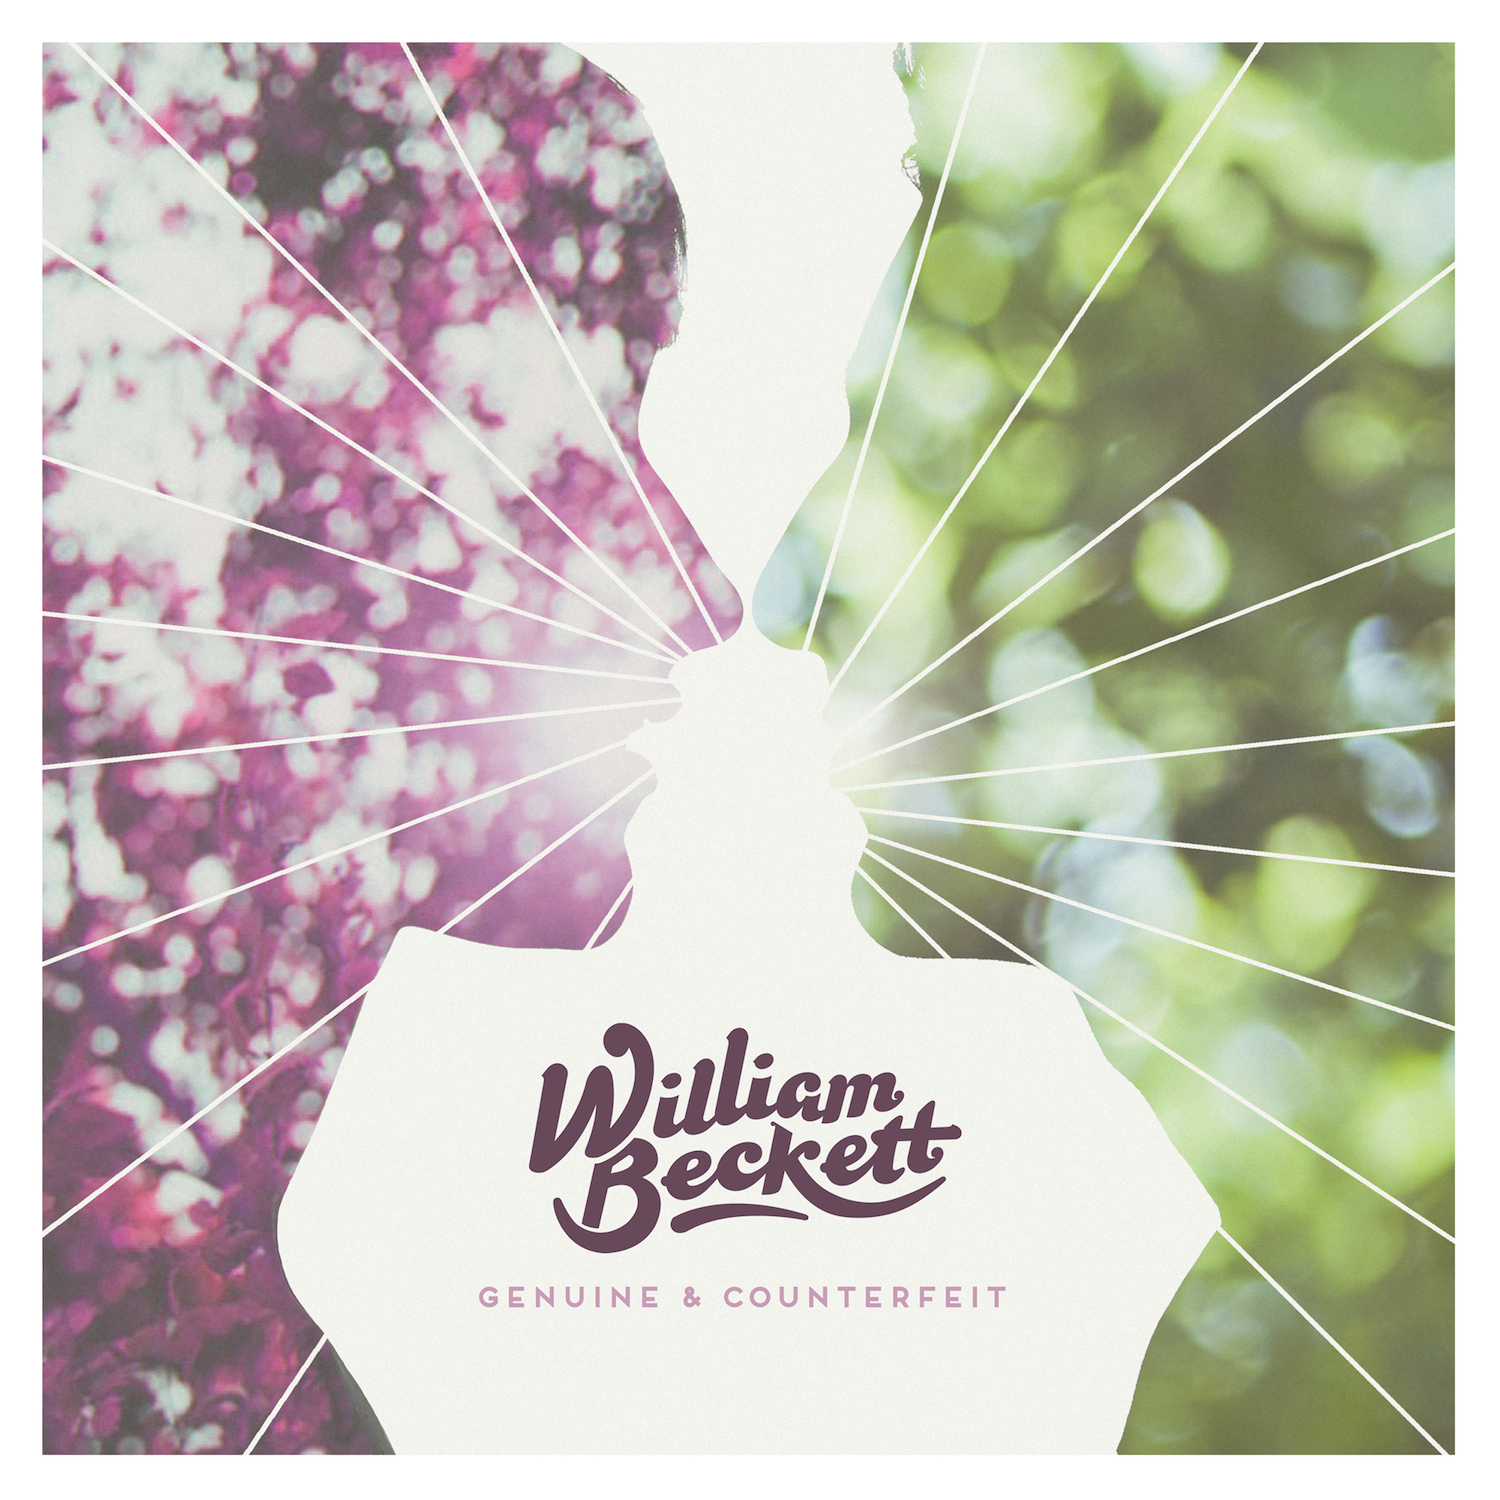 News Added Jun 15, 2013 William Beckett will release his debut full-length album, Genuine & Counterfeit, on August 20 via Equal Vision Records. His single "Benny & Joon" will be out June 18. Looking back from an interview Beckett did with AP in April, it's safe to say we're glad he didn't go with his […]